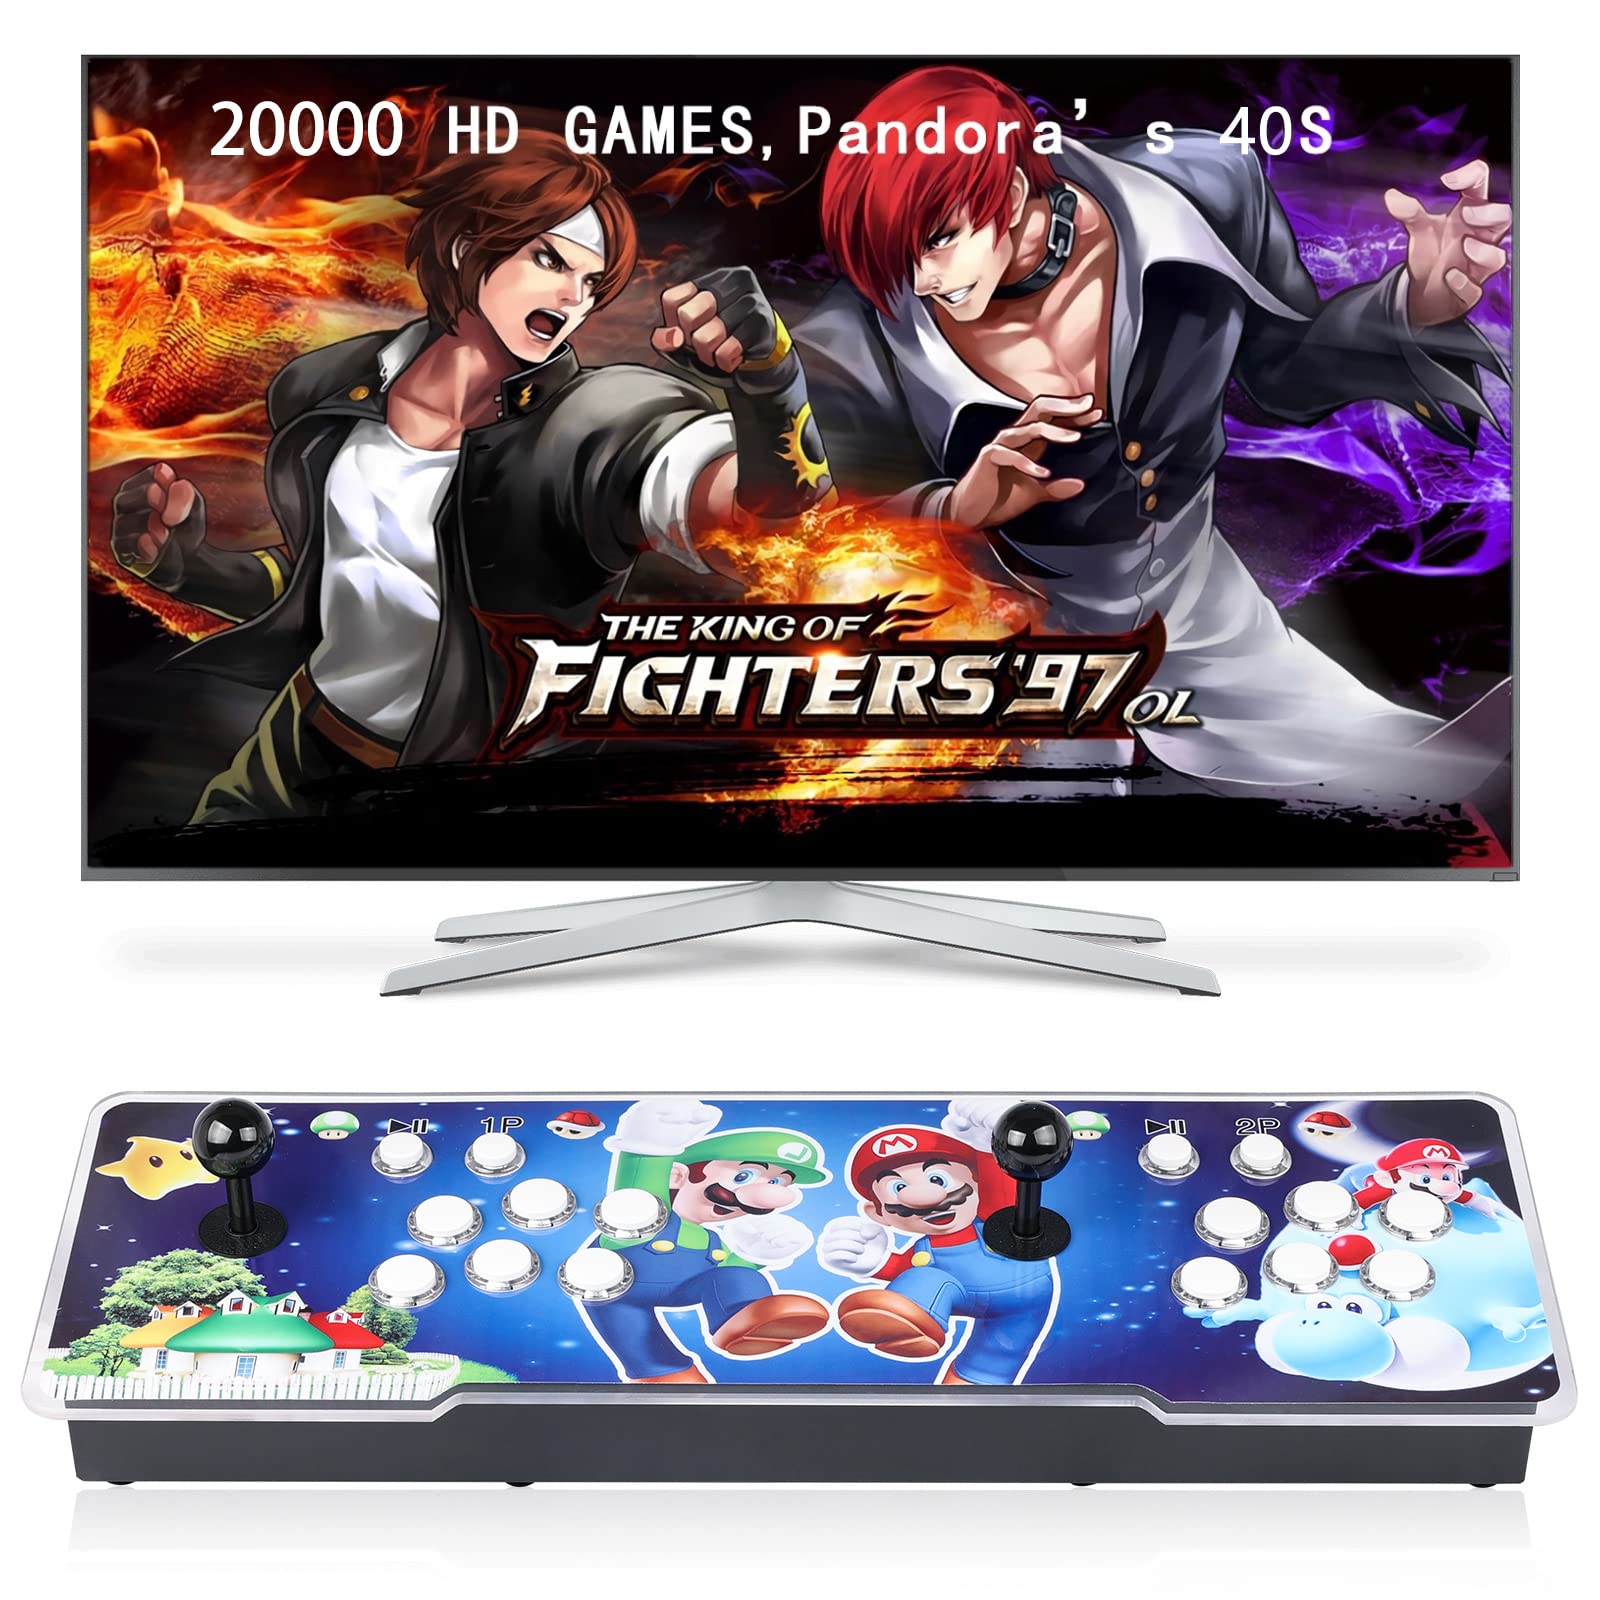 FVBADE [20000 Games in 1 40S Pandora Box Arcade Game Console Compatible PC & Projector & TV,3D Games 1-4 Players Double Joystick Favorite List Game Category Save/Search/Hide/Pause/Delete Games.